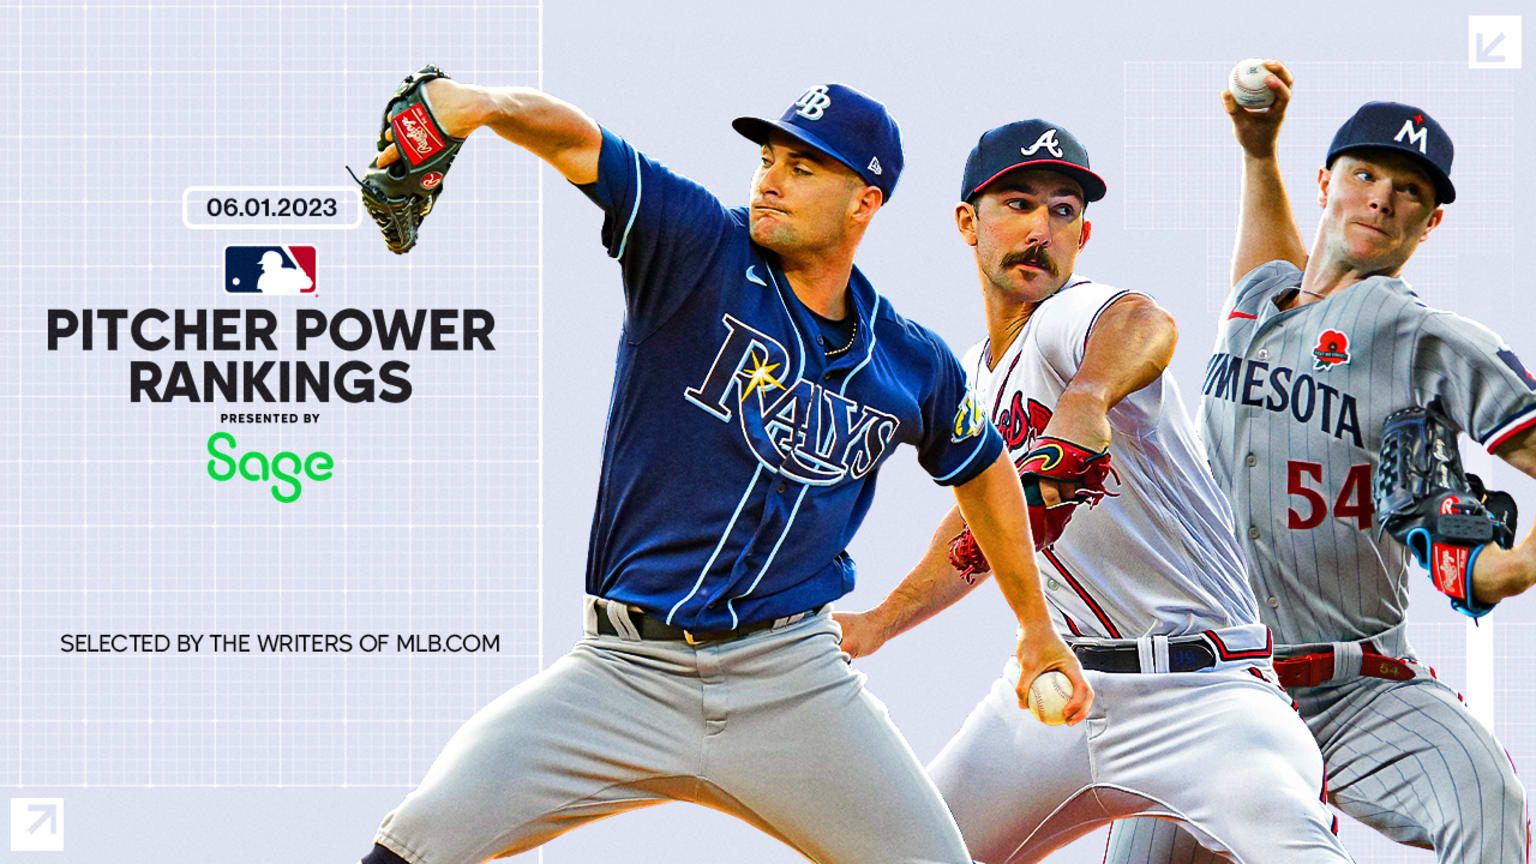 Pitcher Power Rankings image featuring Shane McClanahan, Spencer Strider and Sonny Gray